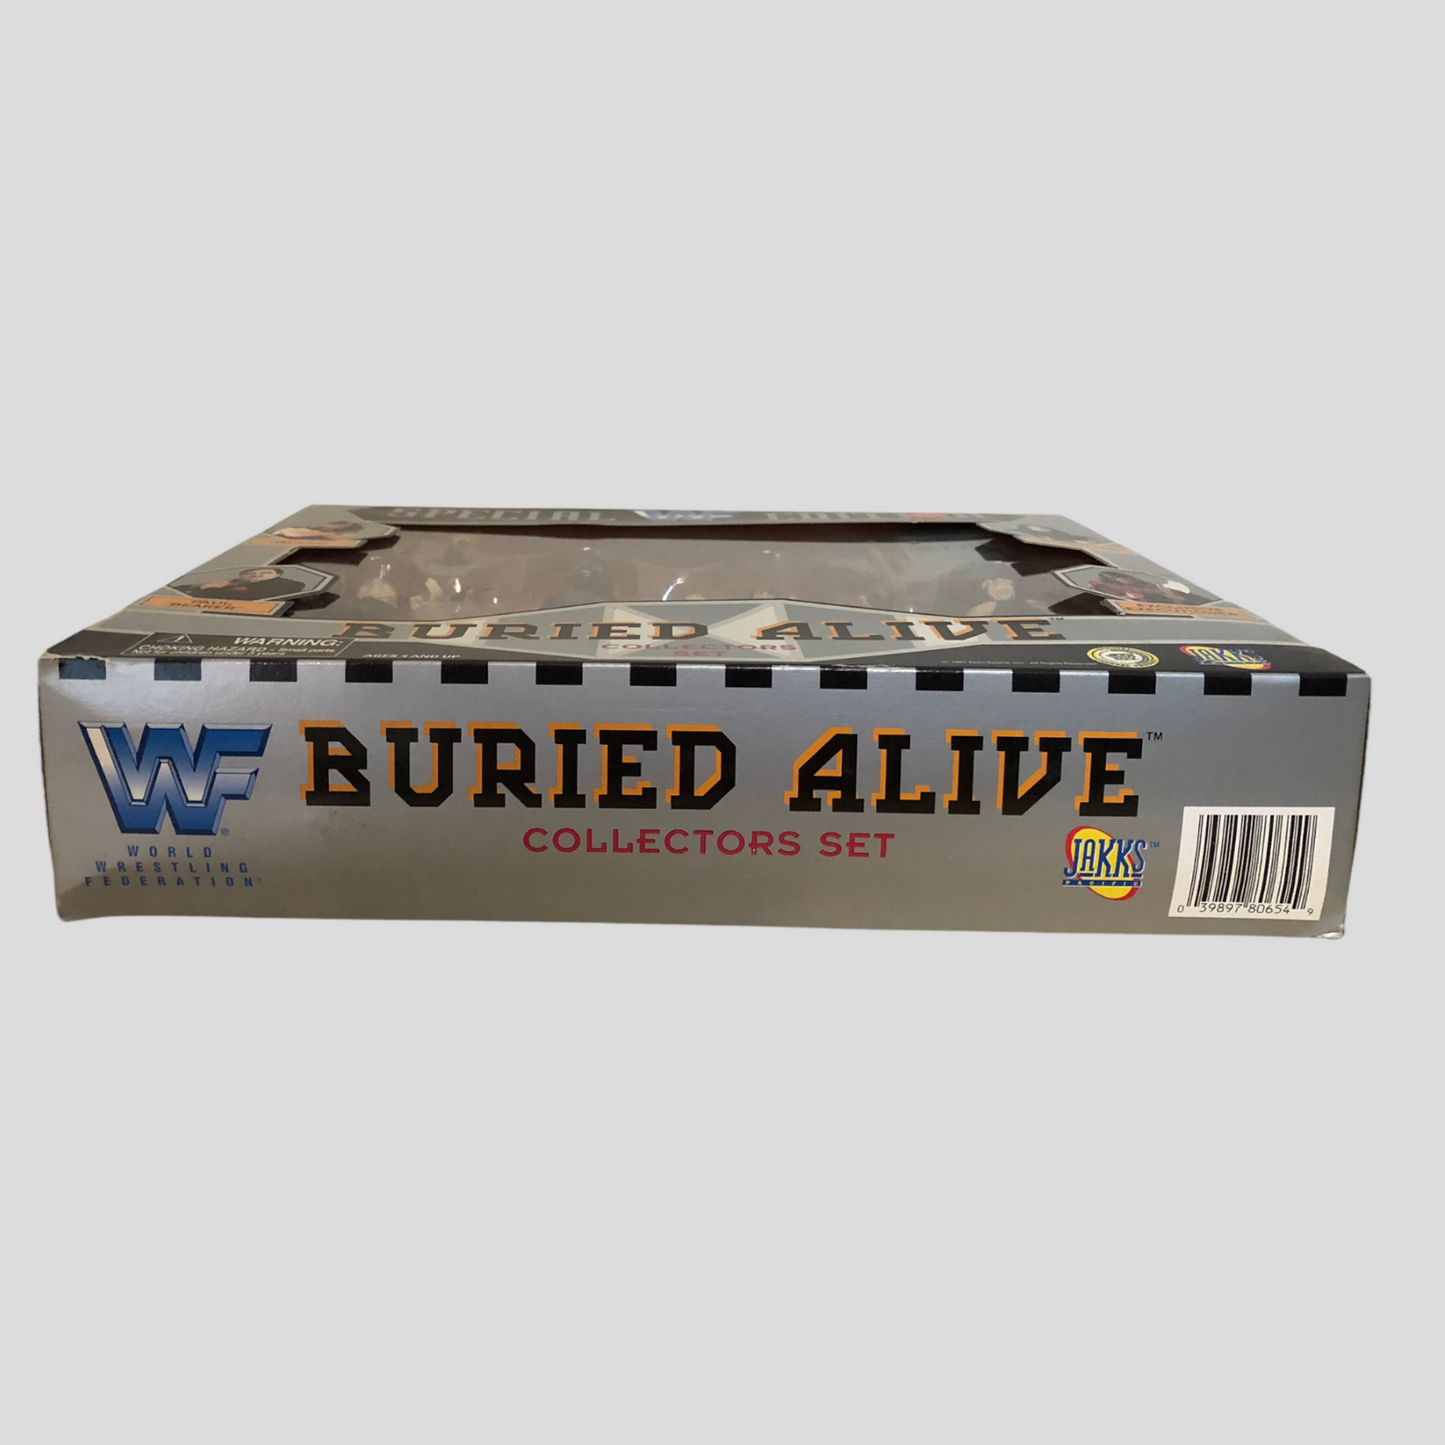 1997 WWF Jakks Pacific Special Edition Buried Alive Box Set: Mankind, Paul Bearer, Undertaker & Executioner [Exclusive]